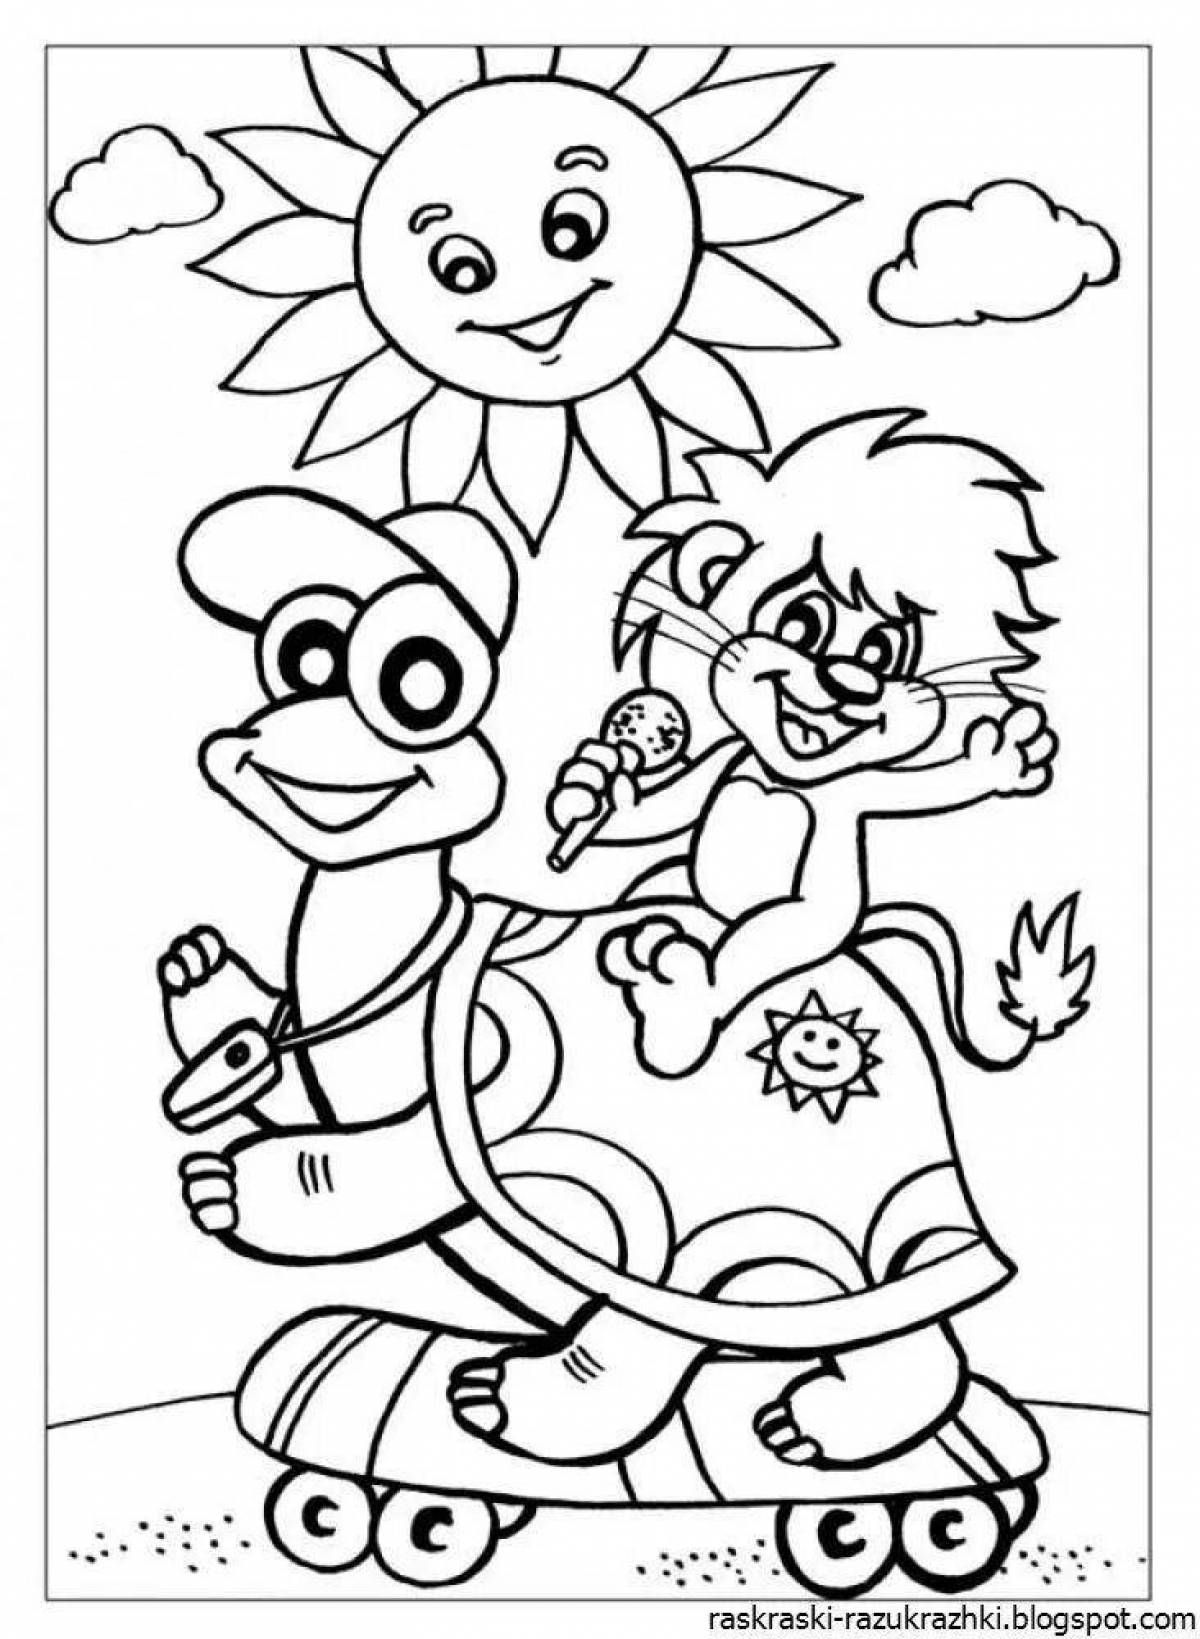 Adorable coloring book for kids cartoons